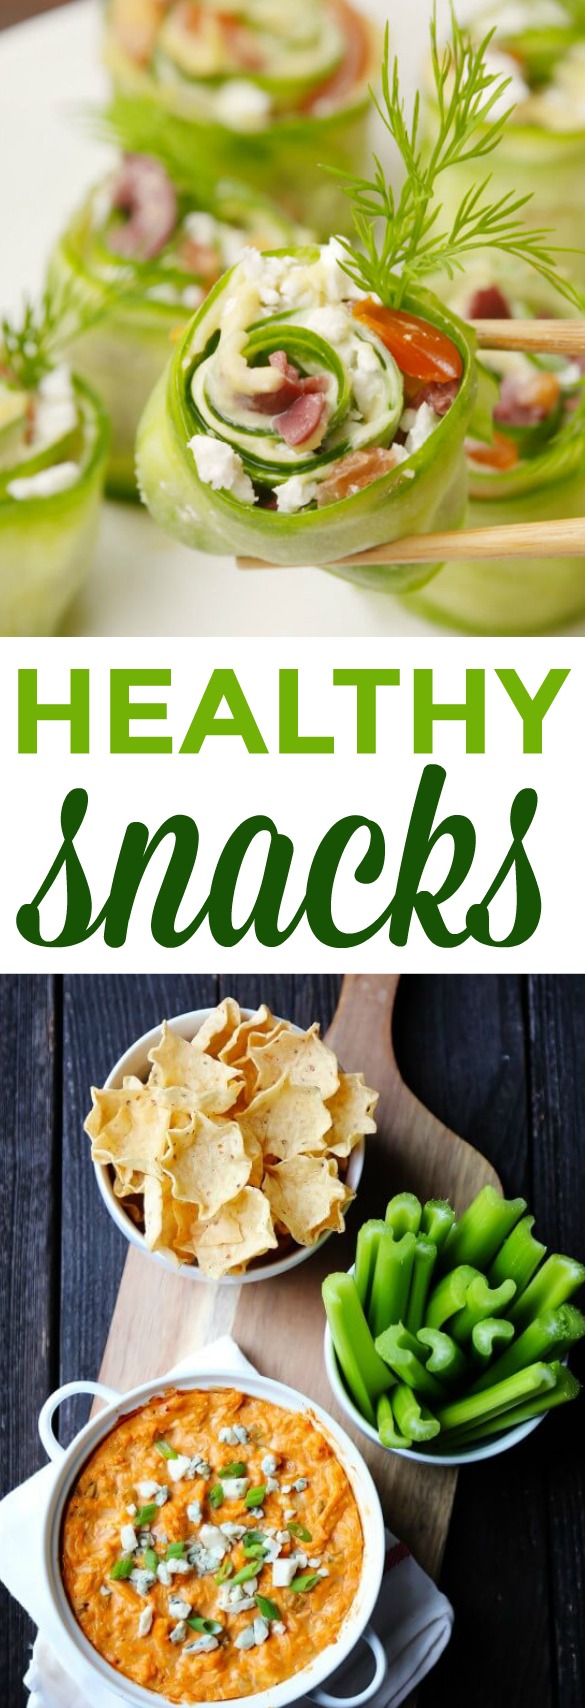 Healthy Snacks - A Little Craft In Your Day